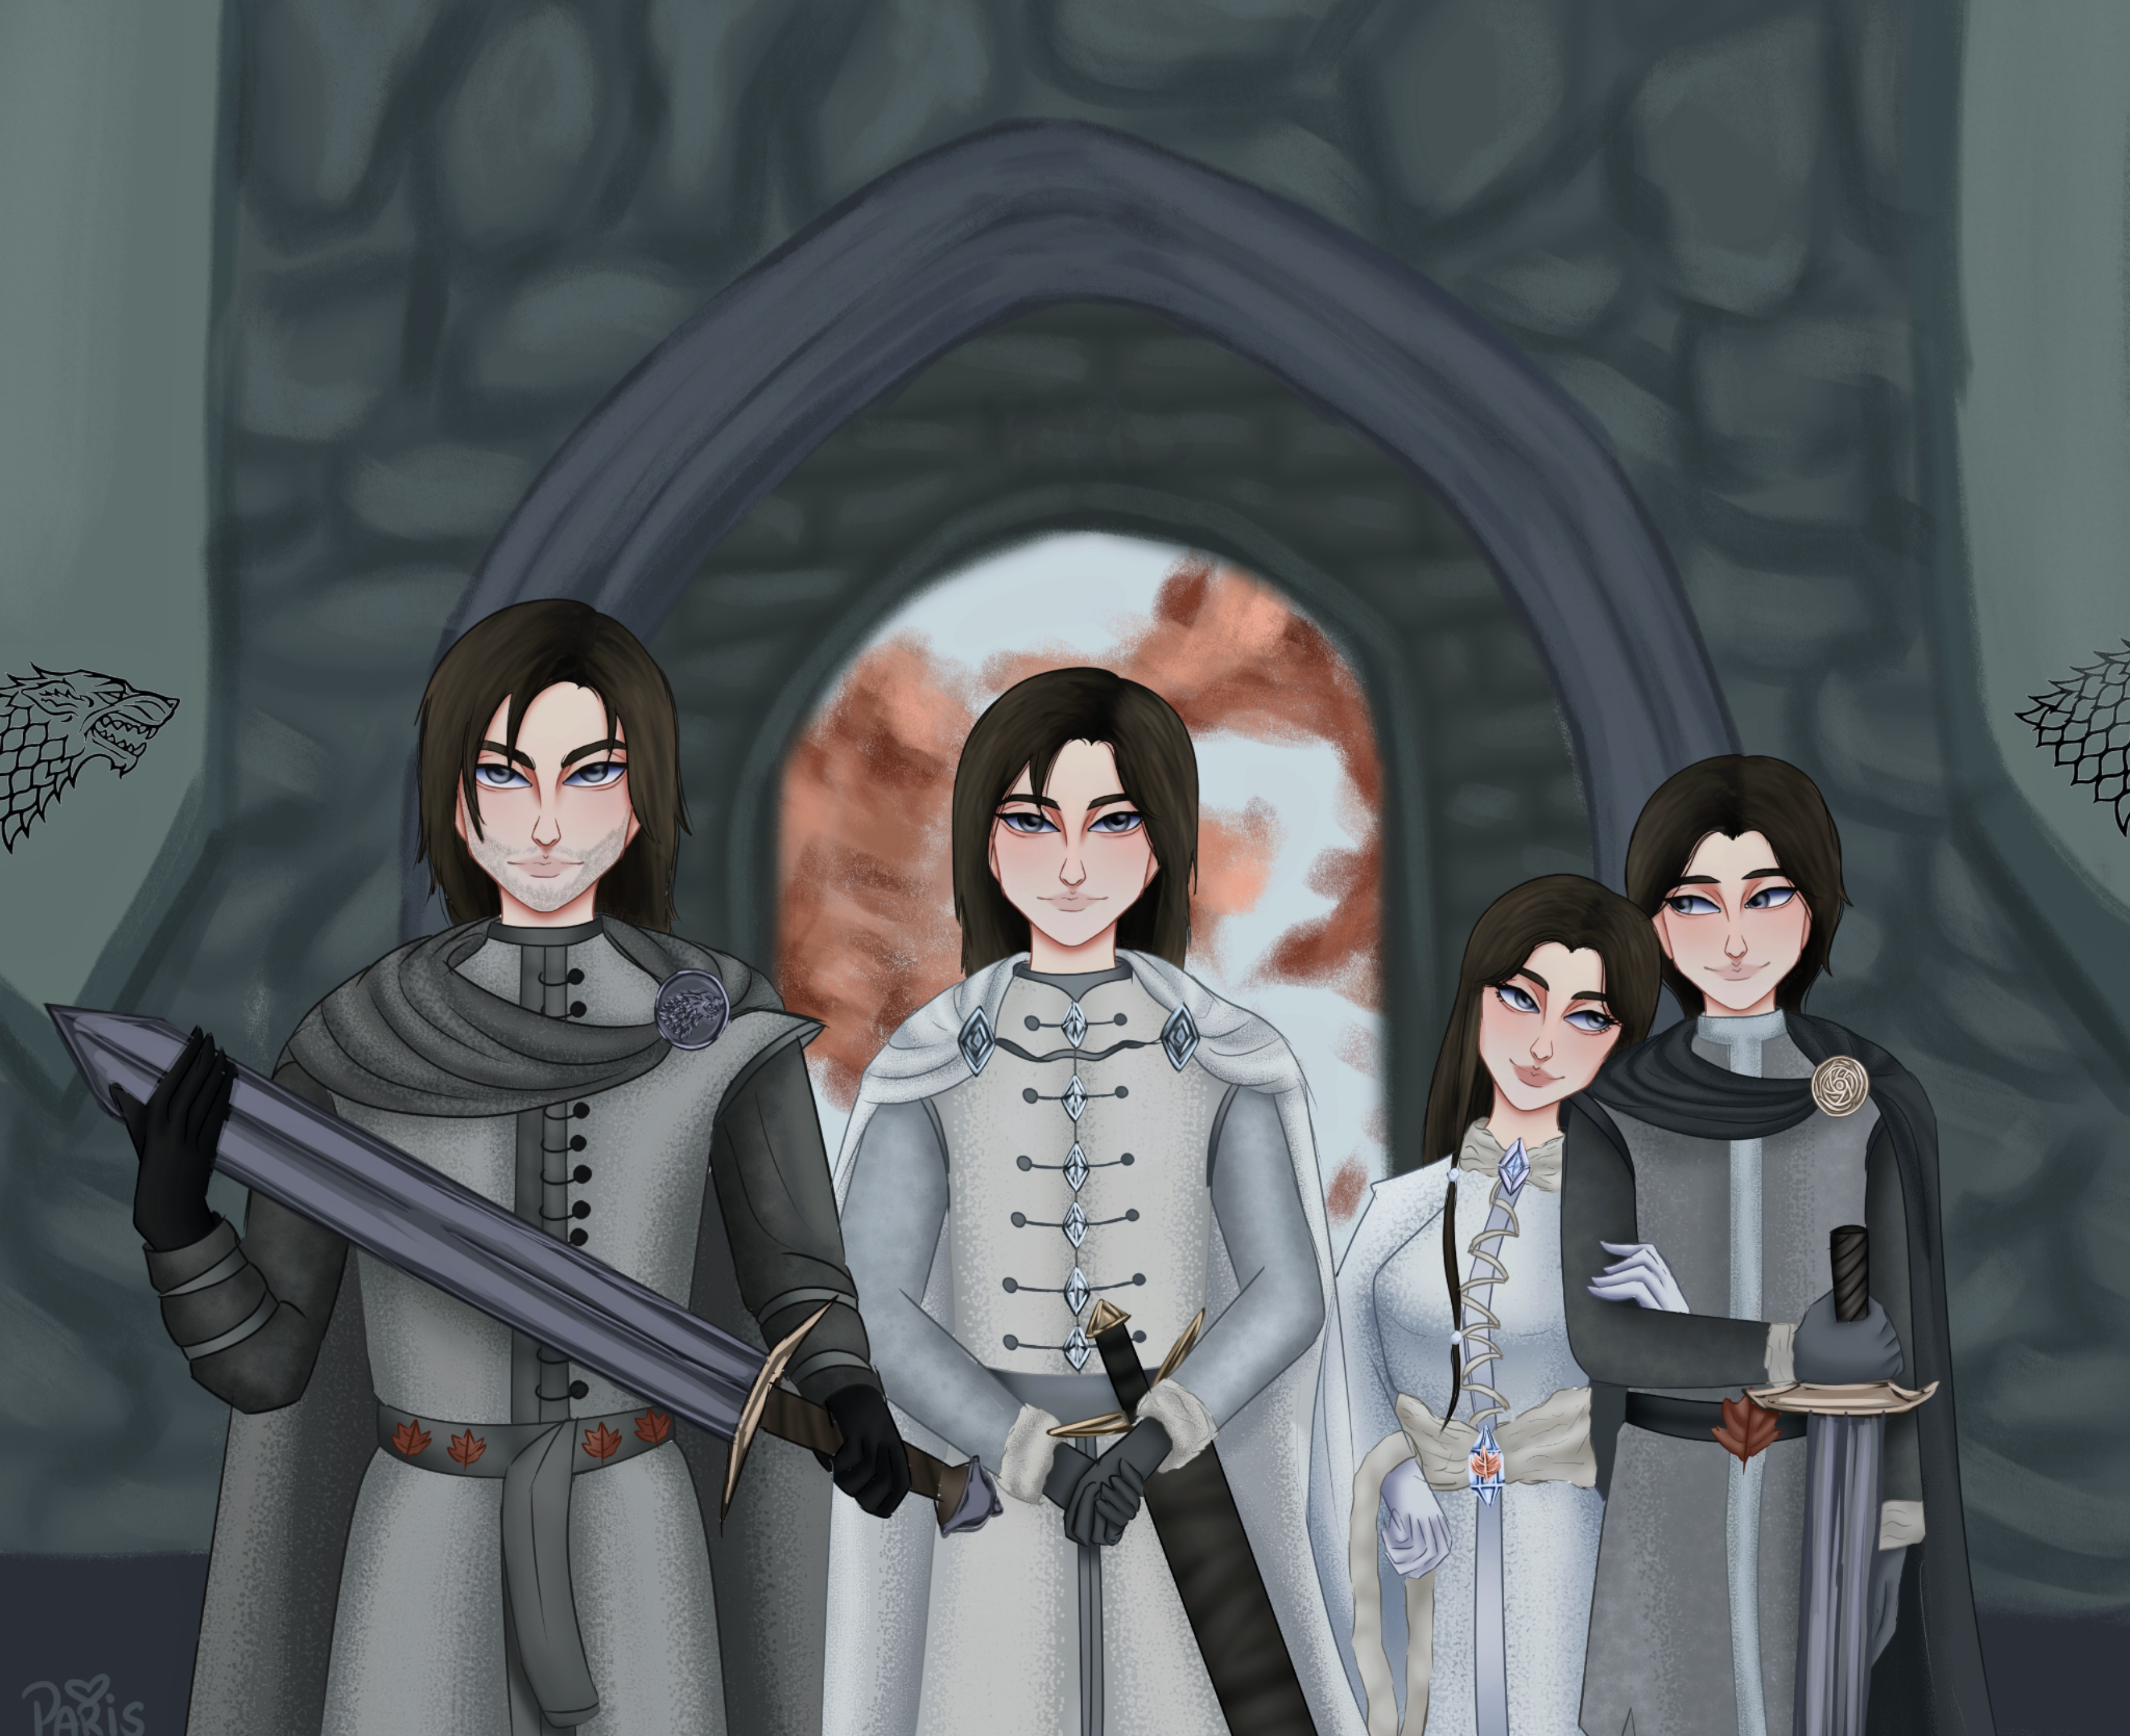 Kings And Queens of Narnia by MonsieurArtiste on DeviantArt